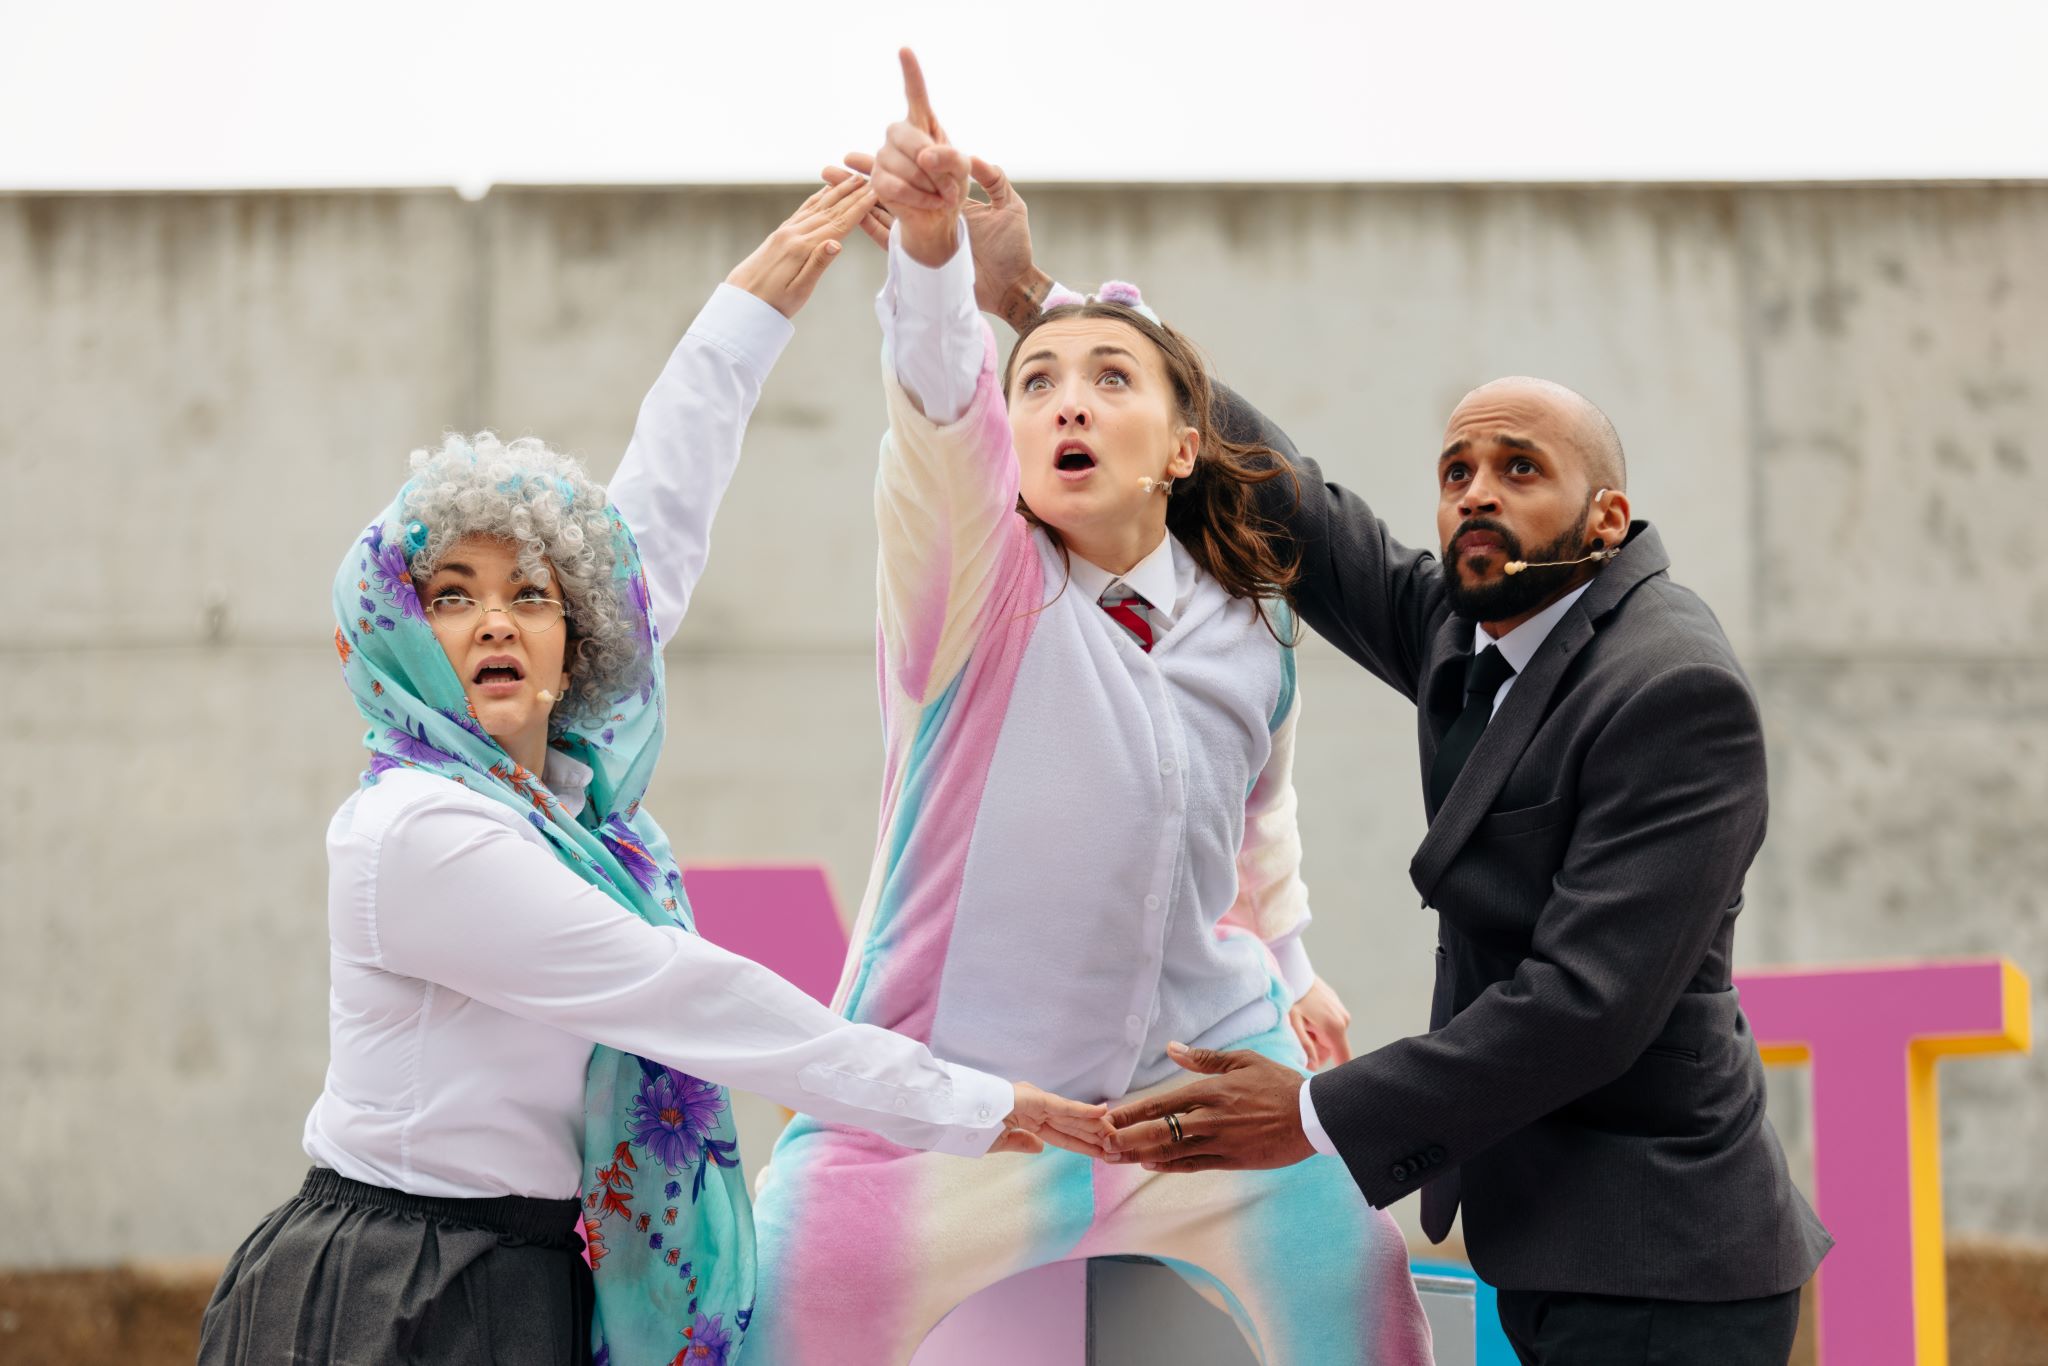 A performer wearing a multicoloured pastel rainbow unicorn onesie over a school uniform points up in the distance. Two other performers form a circle with their arms around her. The one to her left is wearing a black suit; the one to her right is wearing a curly grey wig and blue scarf over her head.